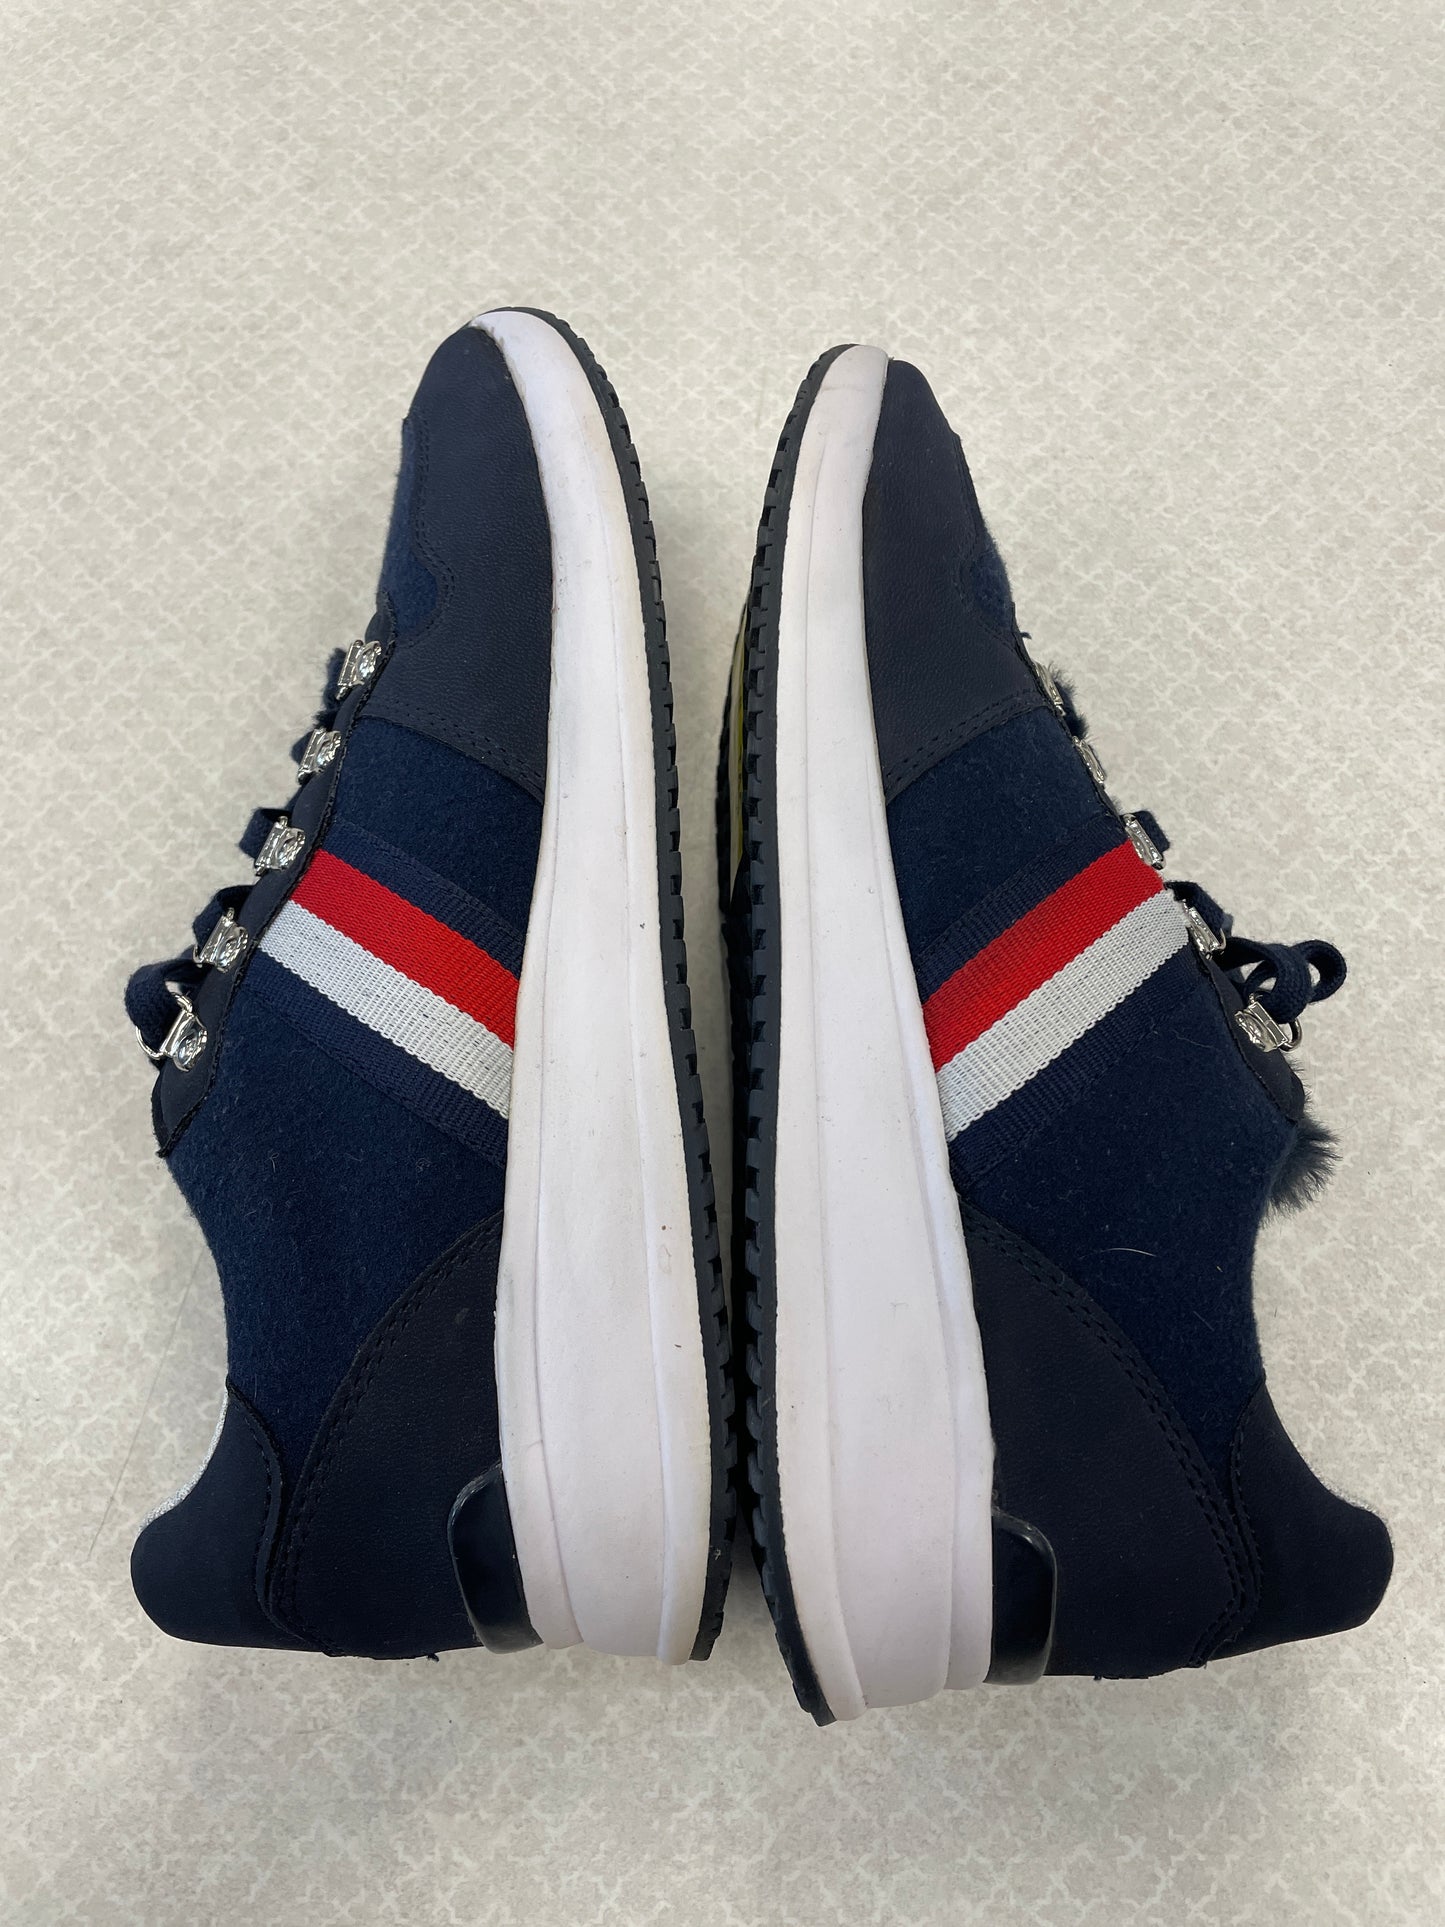 Shoes Athletic By Tommy Hilfiger  Size: 7.5